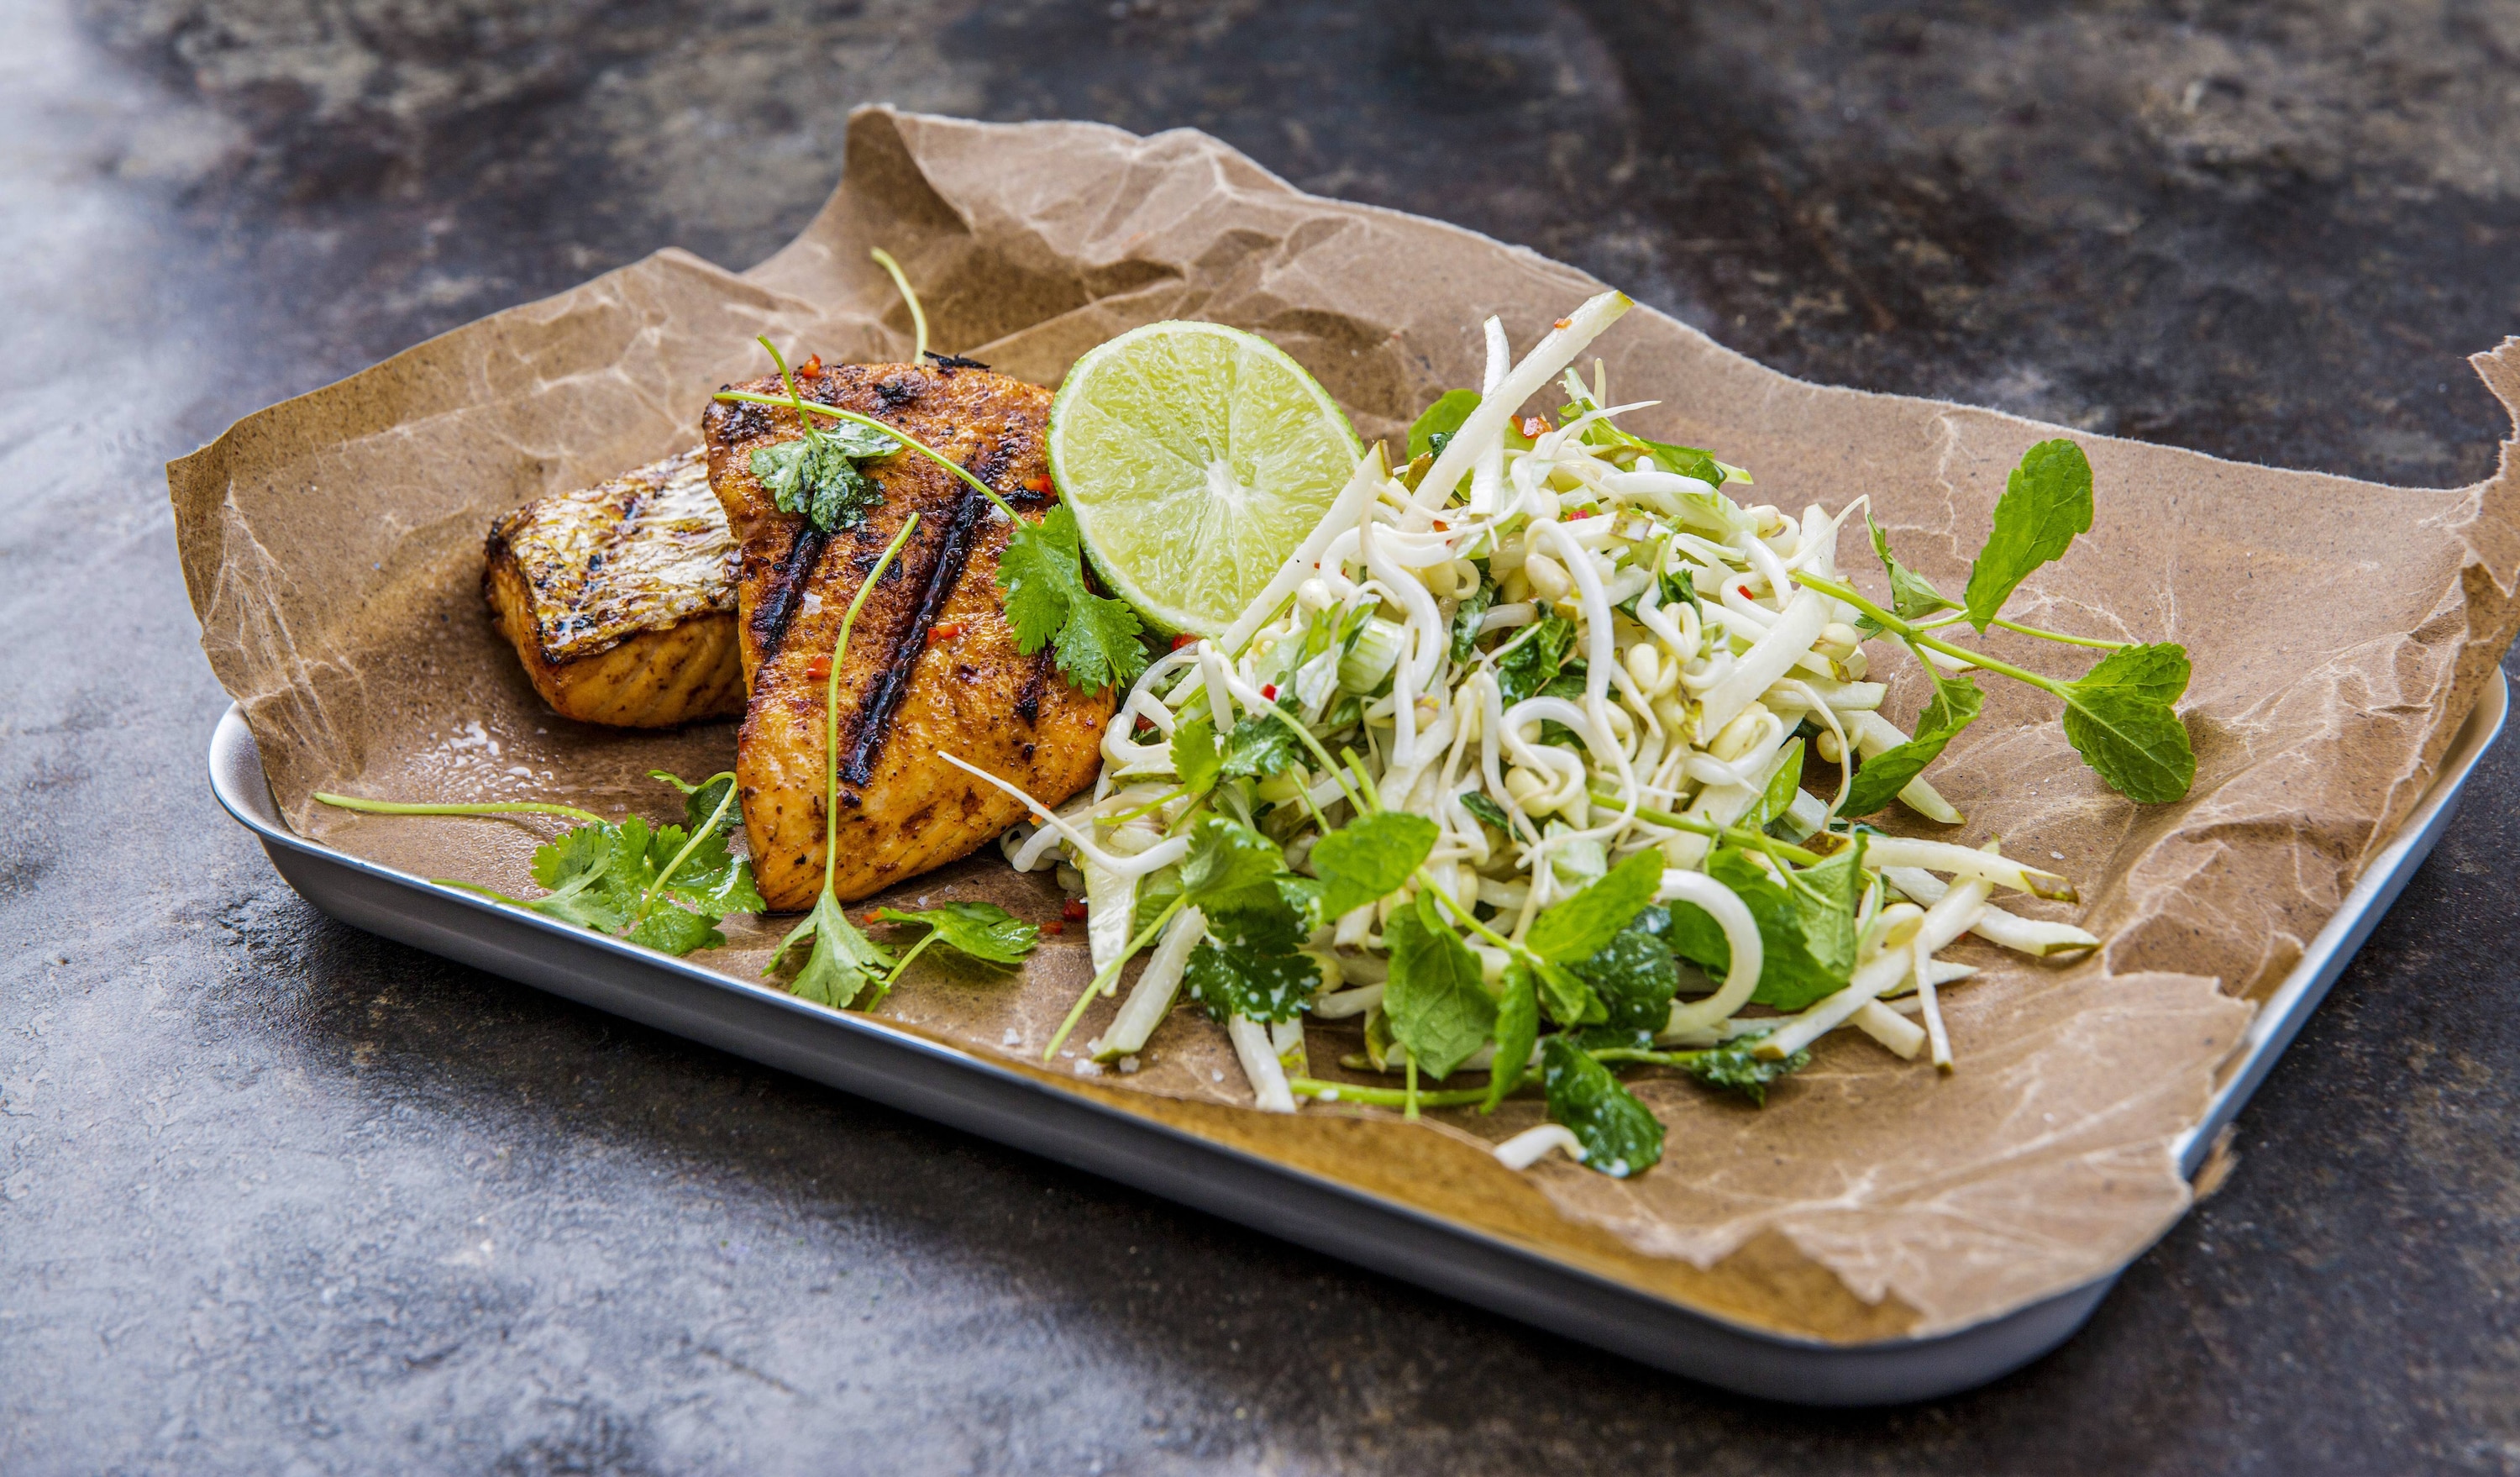 Grilled salmon with pear slaw and BBQ dressing